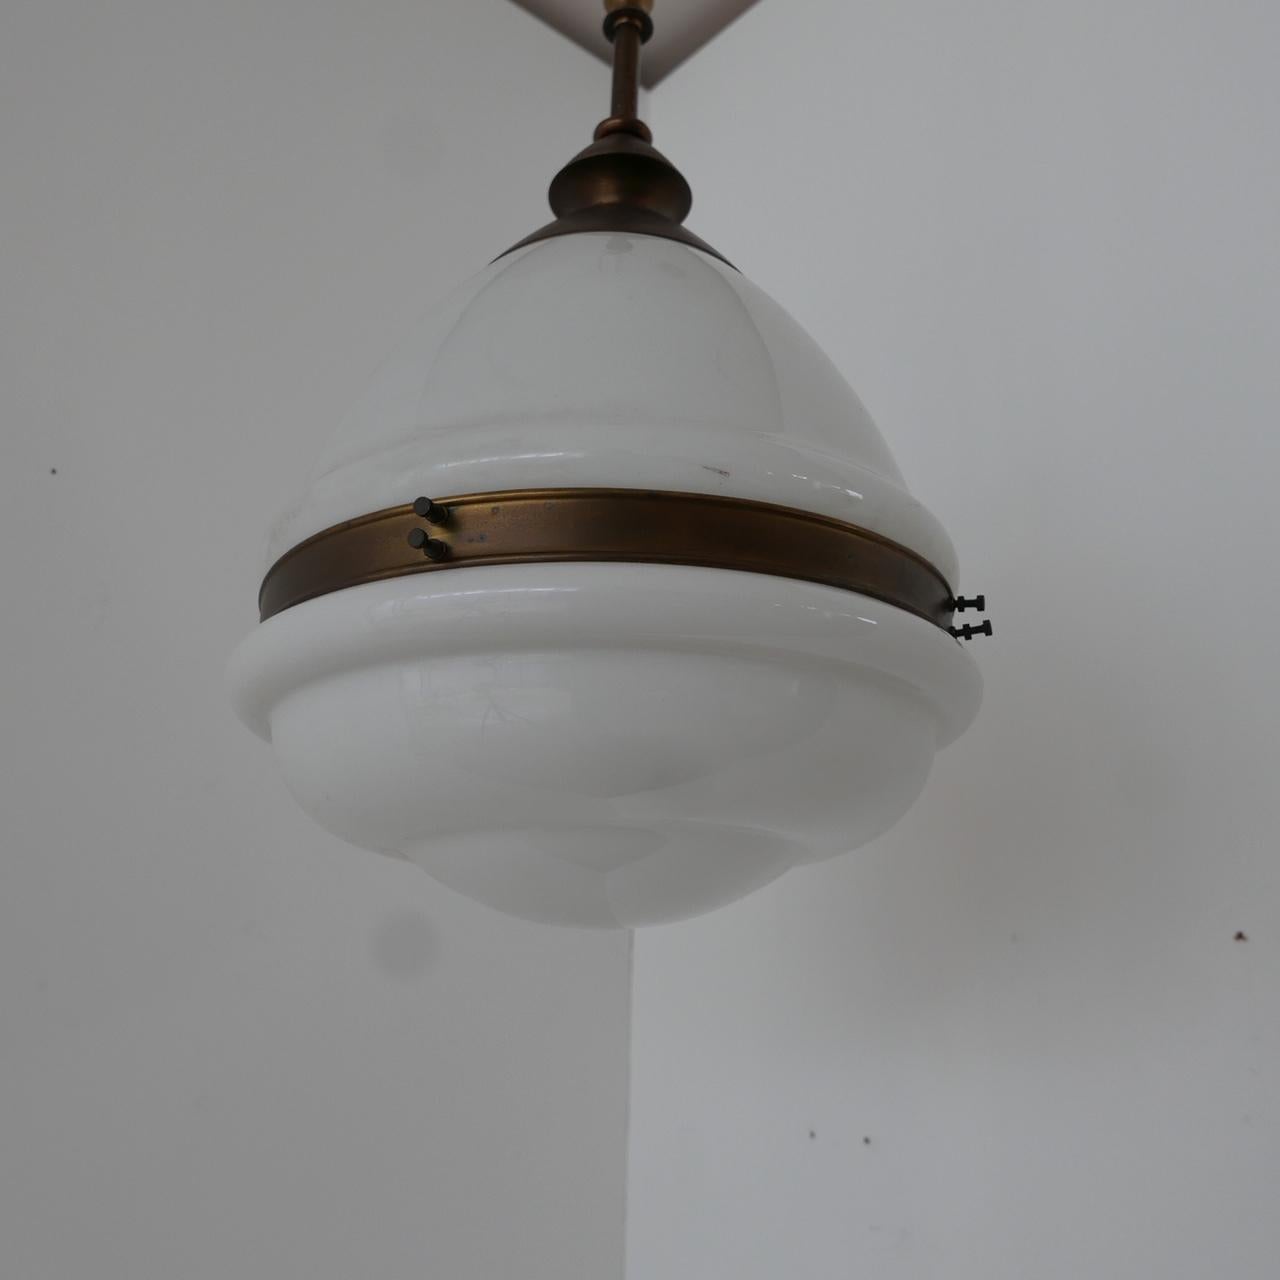 Early to mid-20th century German opaline pendant light,

White opaline glass with a patinated brass rim and gallery.

Re-wired and PAT tested.

There is an internal chip around the brass rim, not visible from the outside but worth noting. It